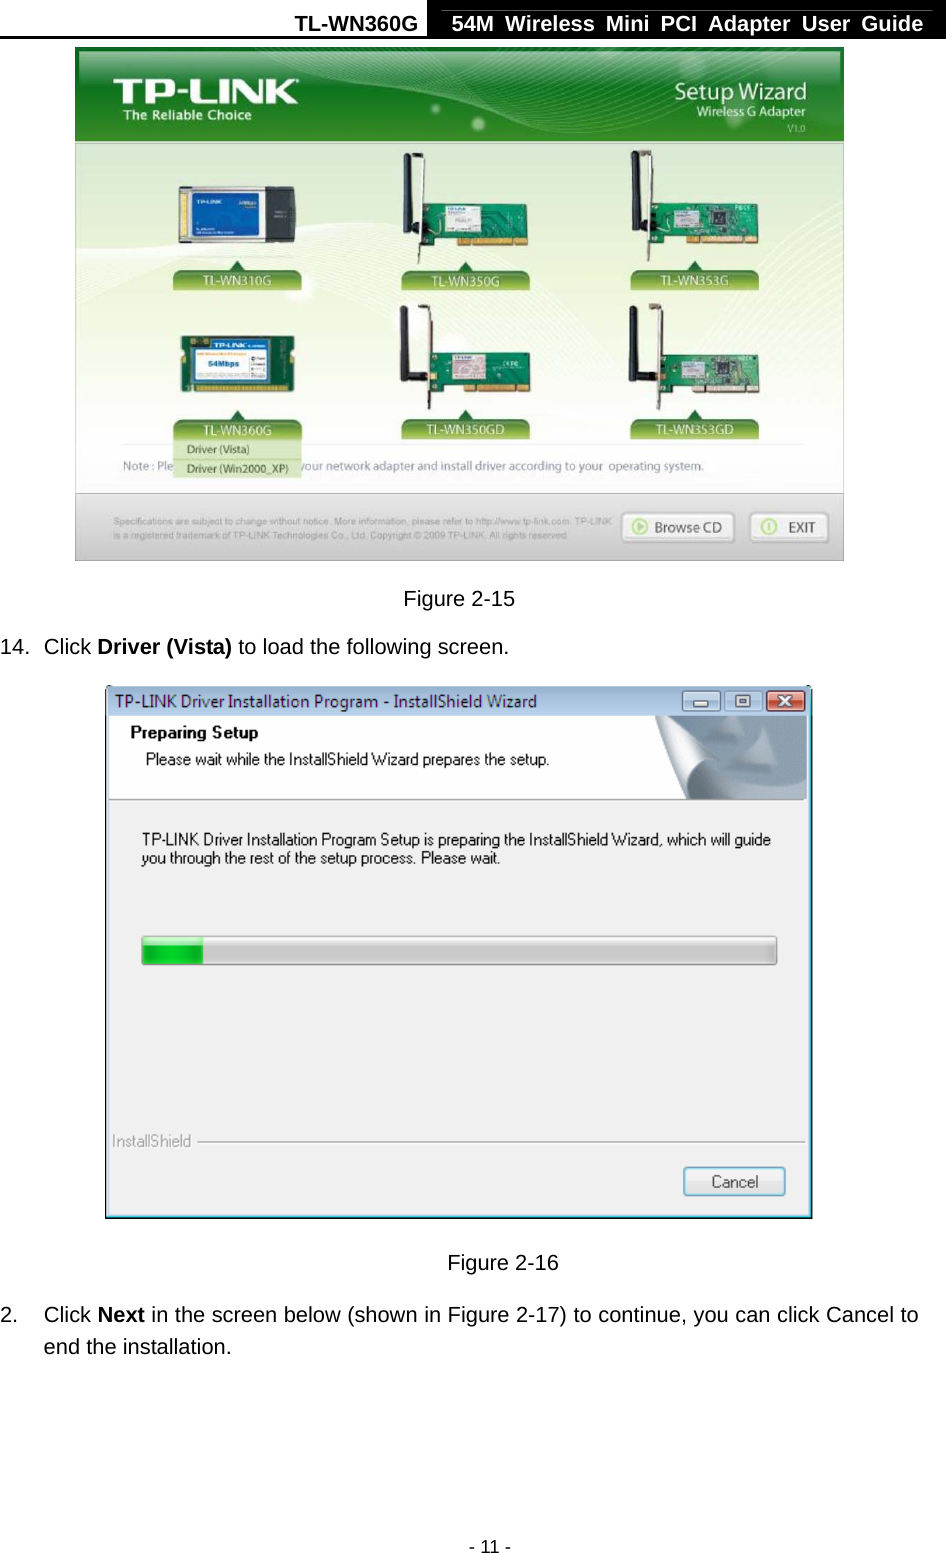 TL-WN360G 54M Wireless Mini PCI Adapter User Guide  - 11 - Figure 2-15 14. Click Driver (Vista) to load the following screen.  Figure 2-16 2. Click Next in the screen below (shown in Figure 2-17) to continue, you can click Cancel to end the installation. 